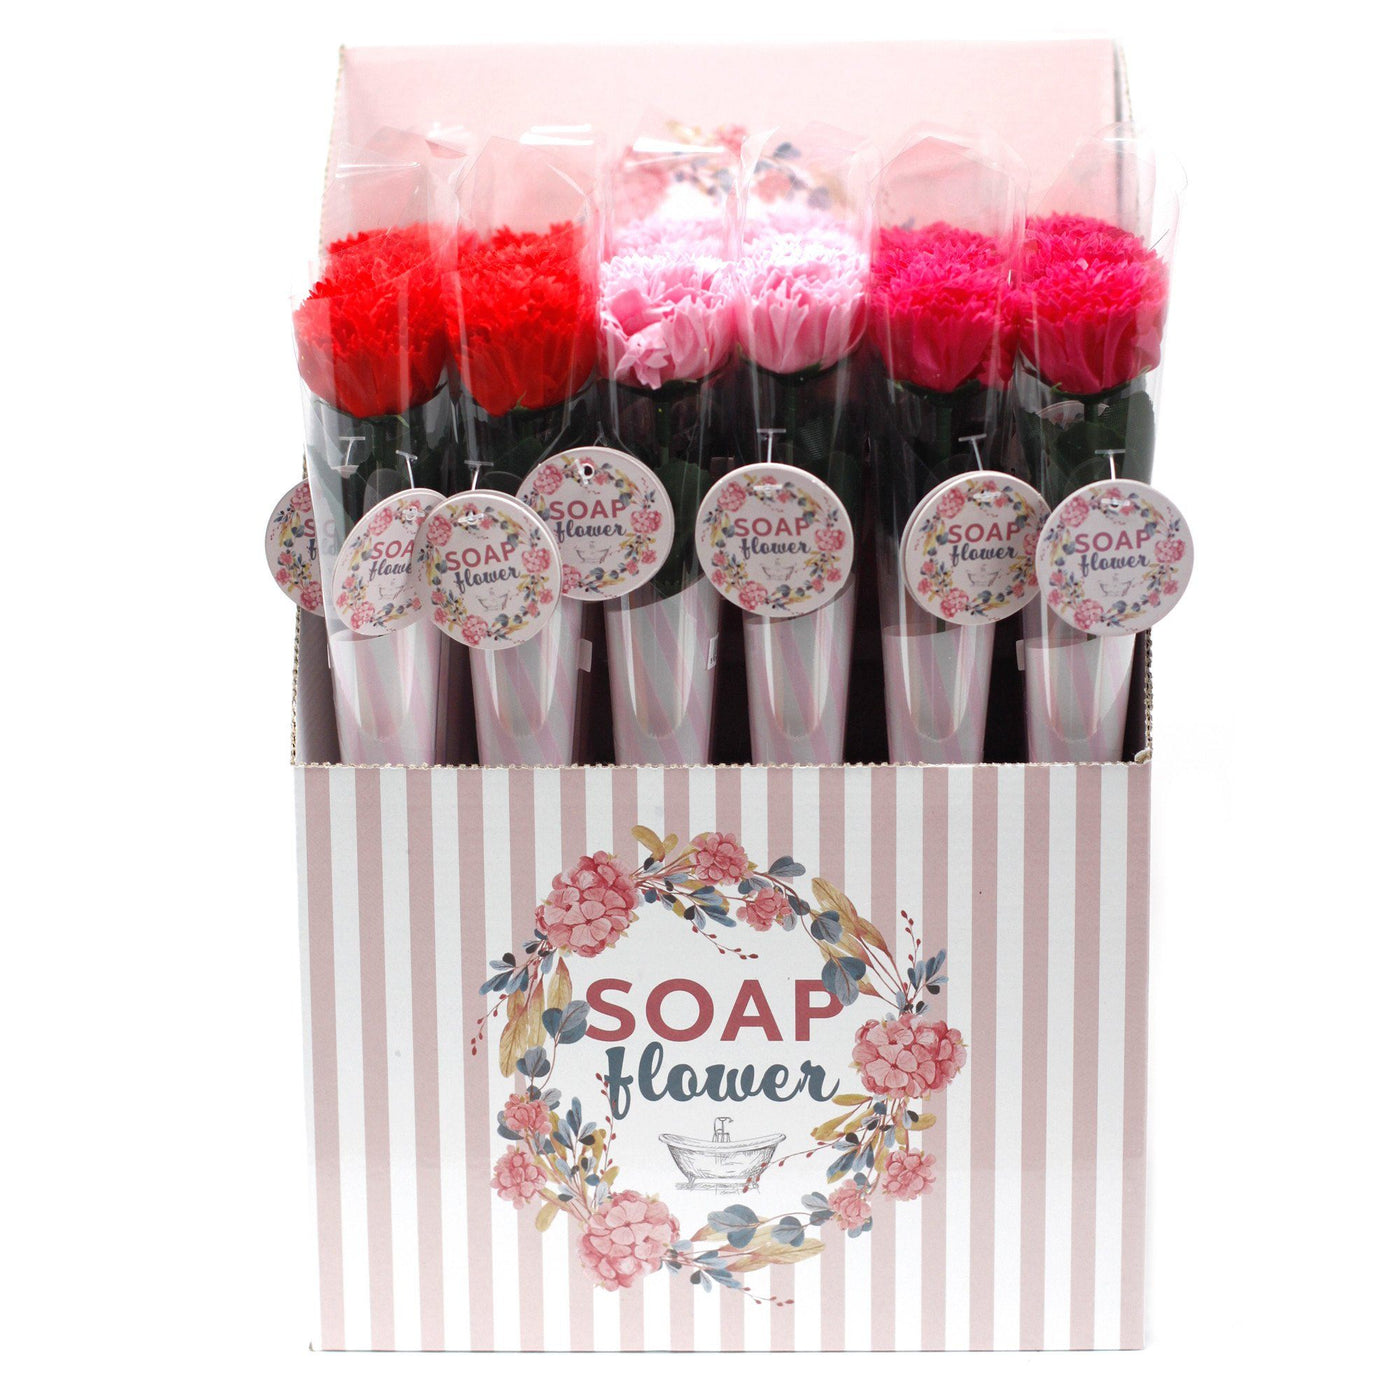 This stunning luxury range of the newly designed Soap Flowers will make a perfect display in your home. They are a perfect addition for a relaxing and romantic bath or you can even use individual petals as guest soaps. Soap Flowers are a perfect gift, Valentine's, wedding favors, Mother's day, or just a little treat for yourself.